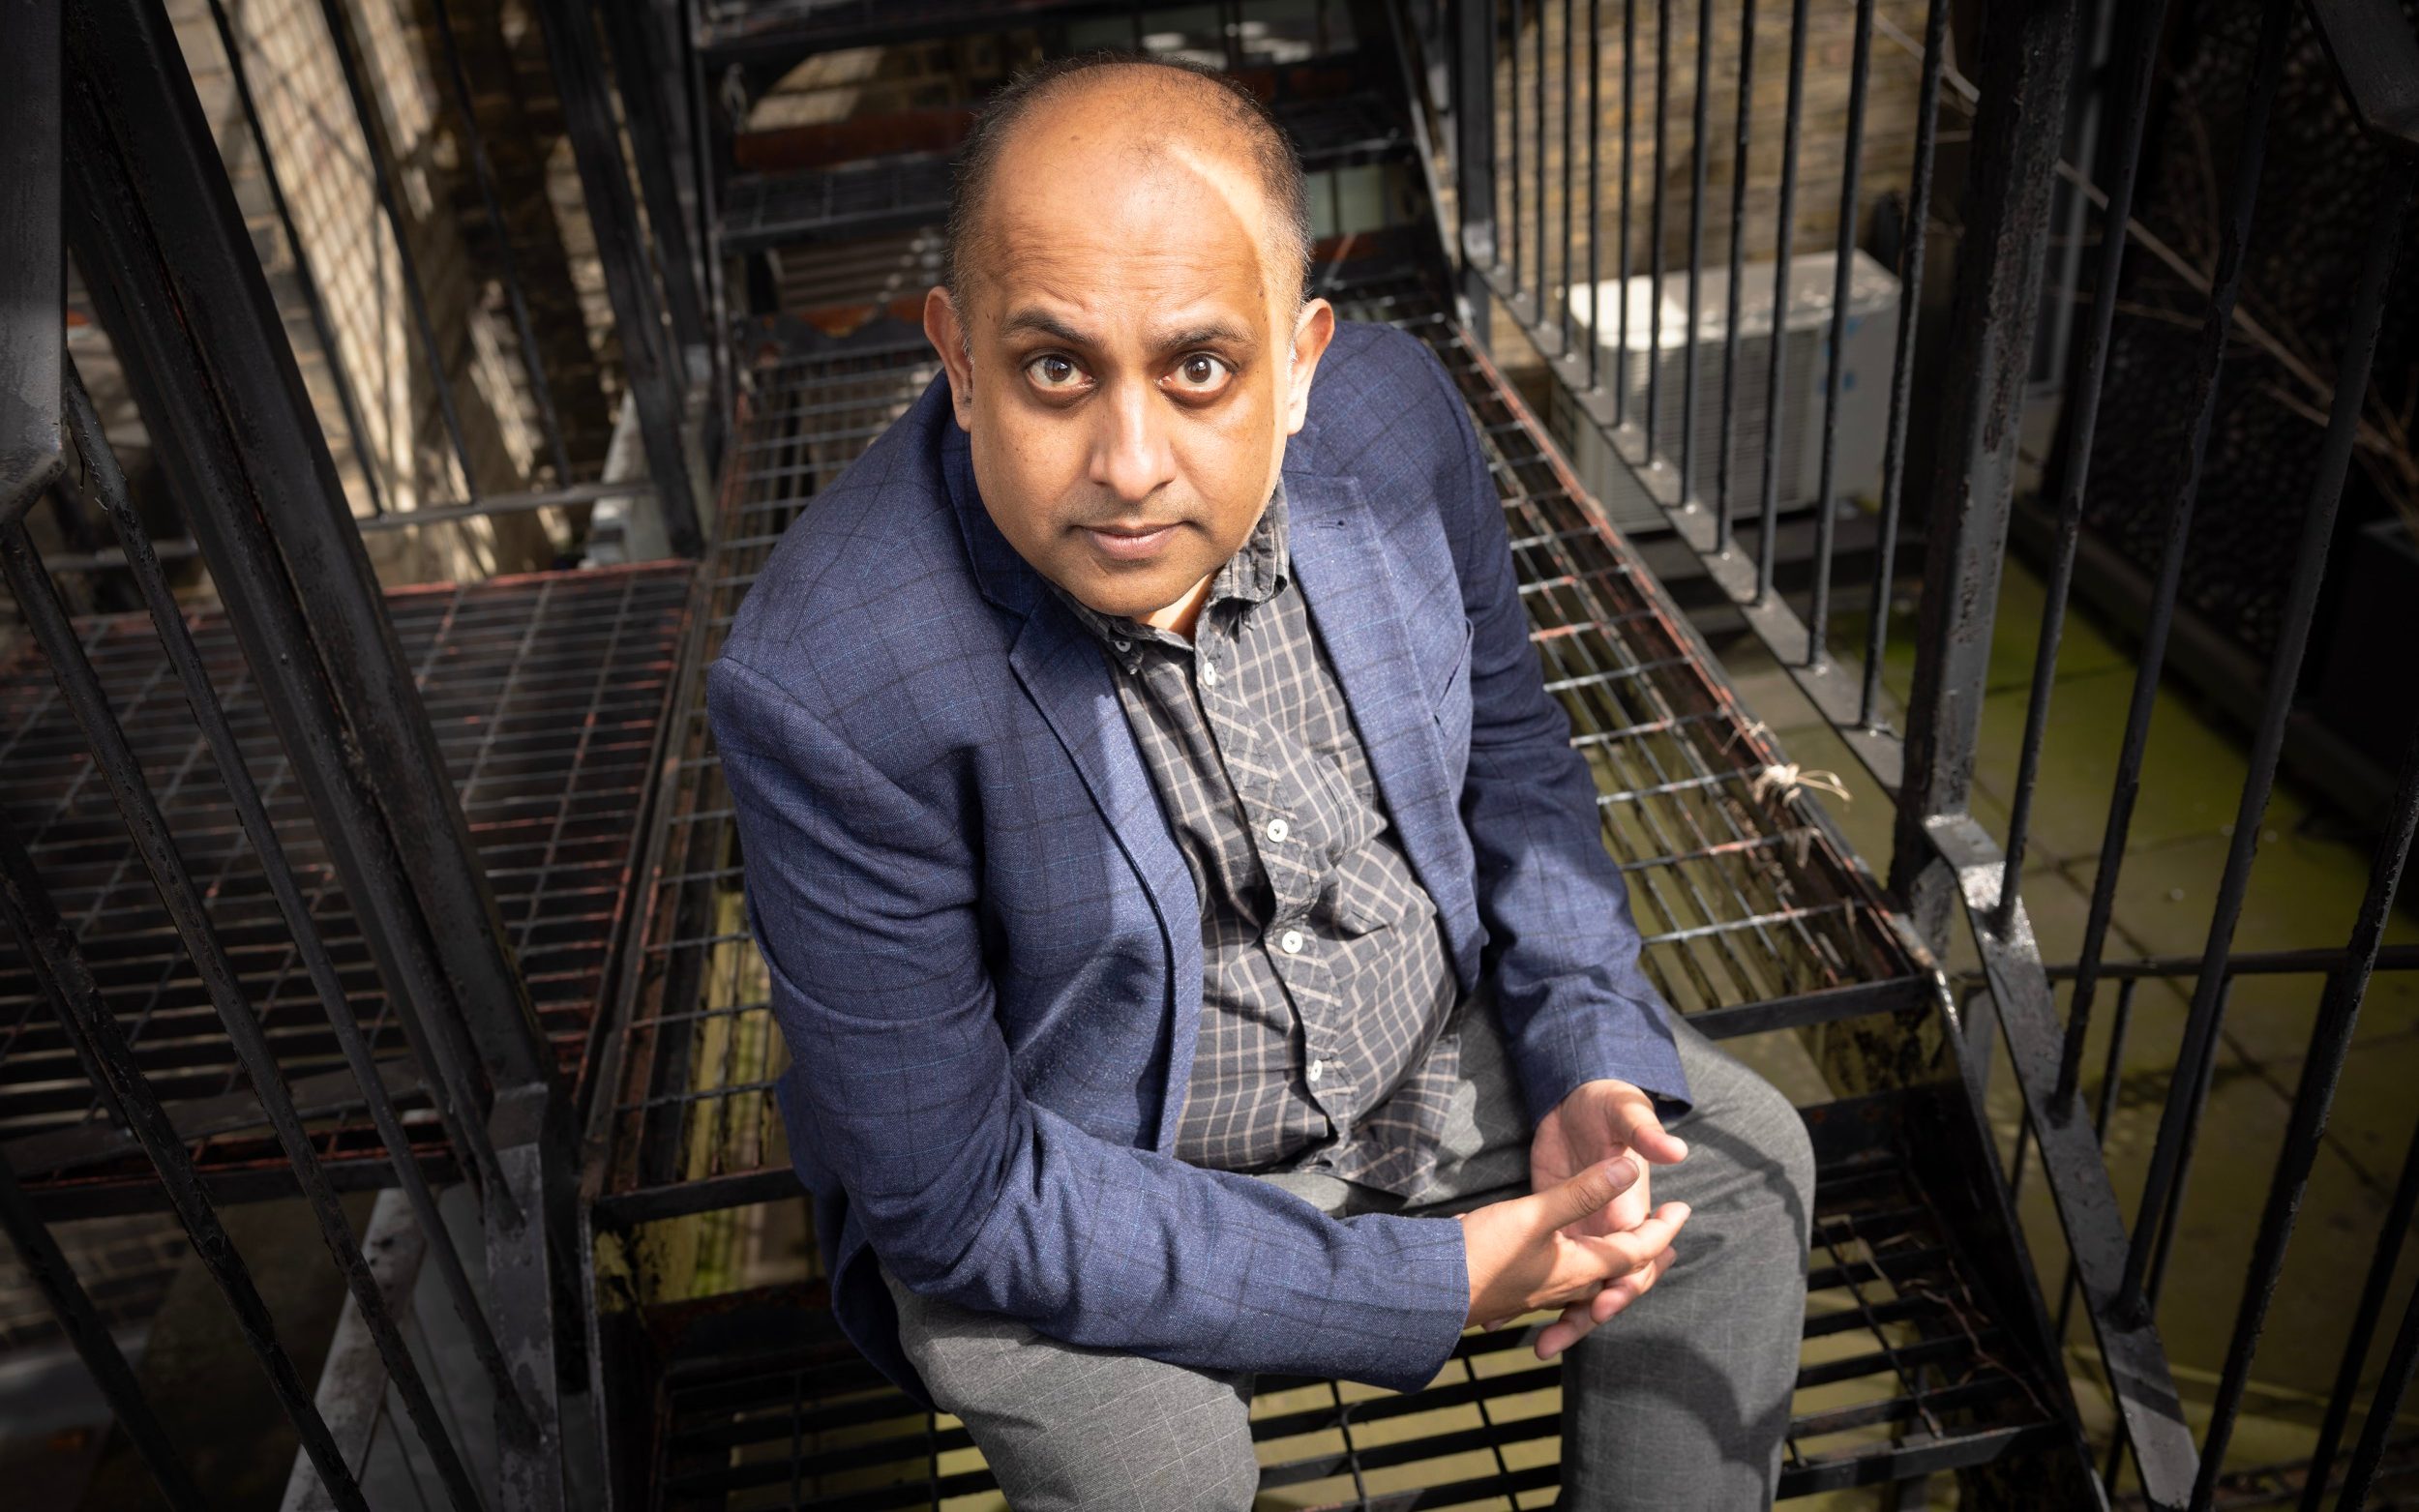 anuvab pal: ‘a white comedian celebrating britishness would be thought of as far-right’